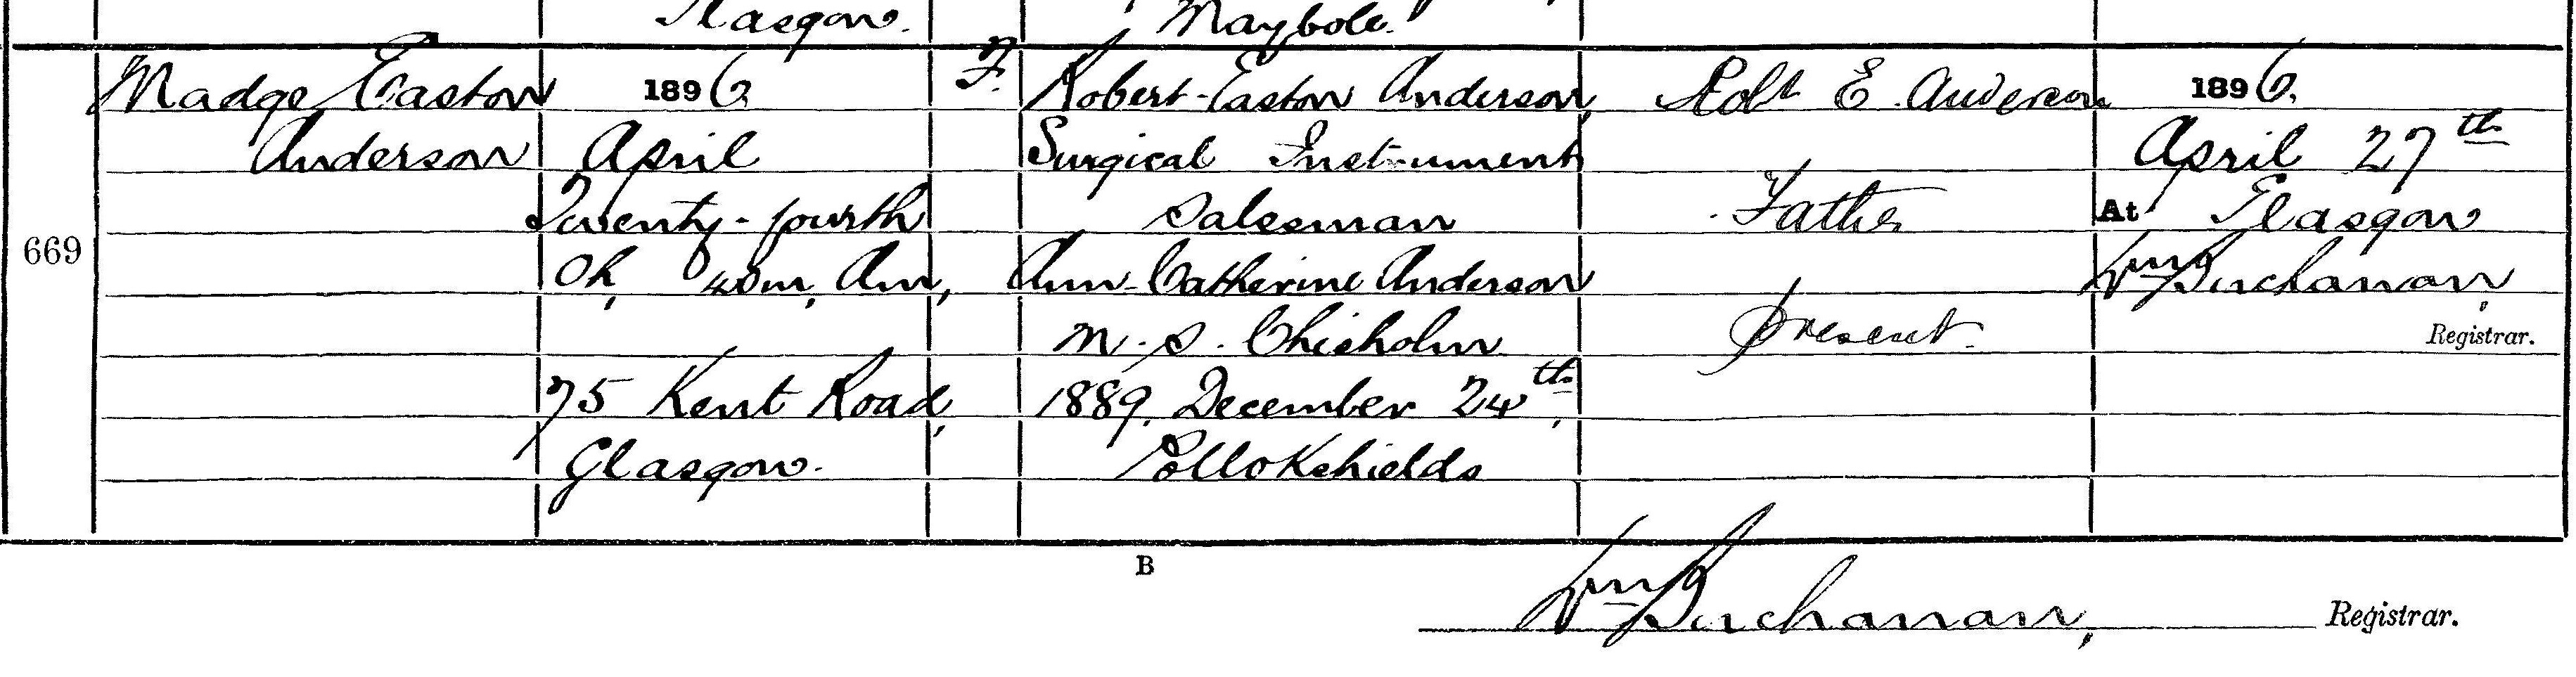 Register of Births entry for Madge Easton Anderson